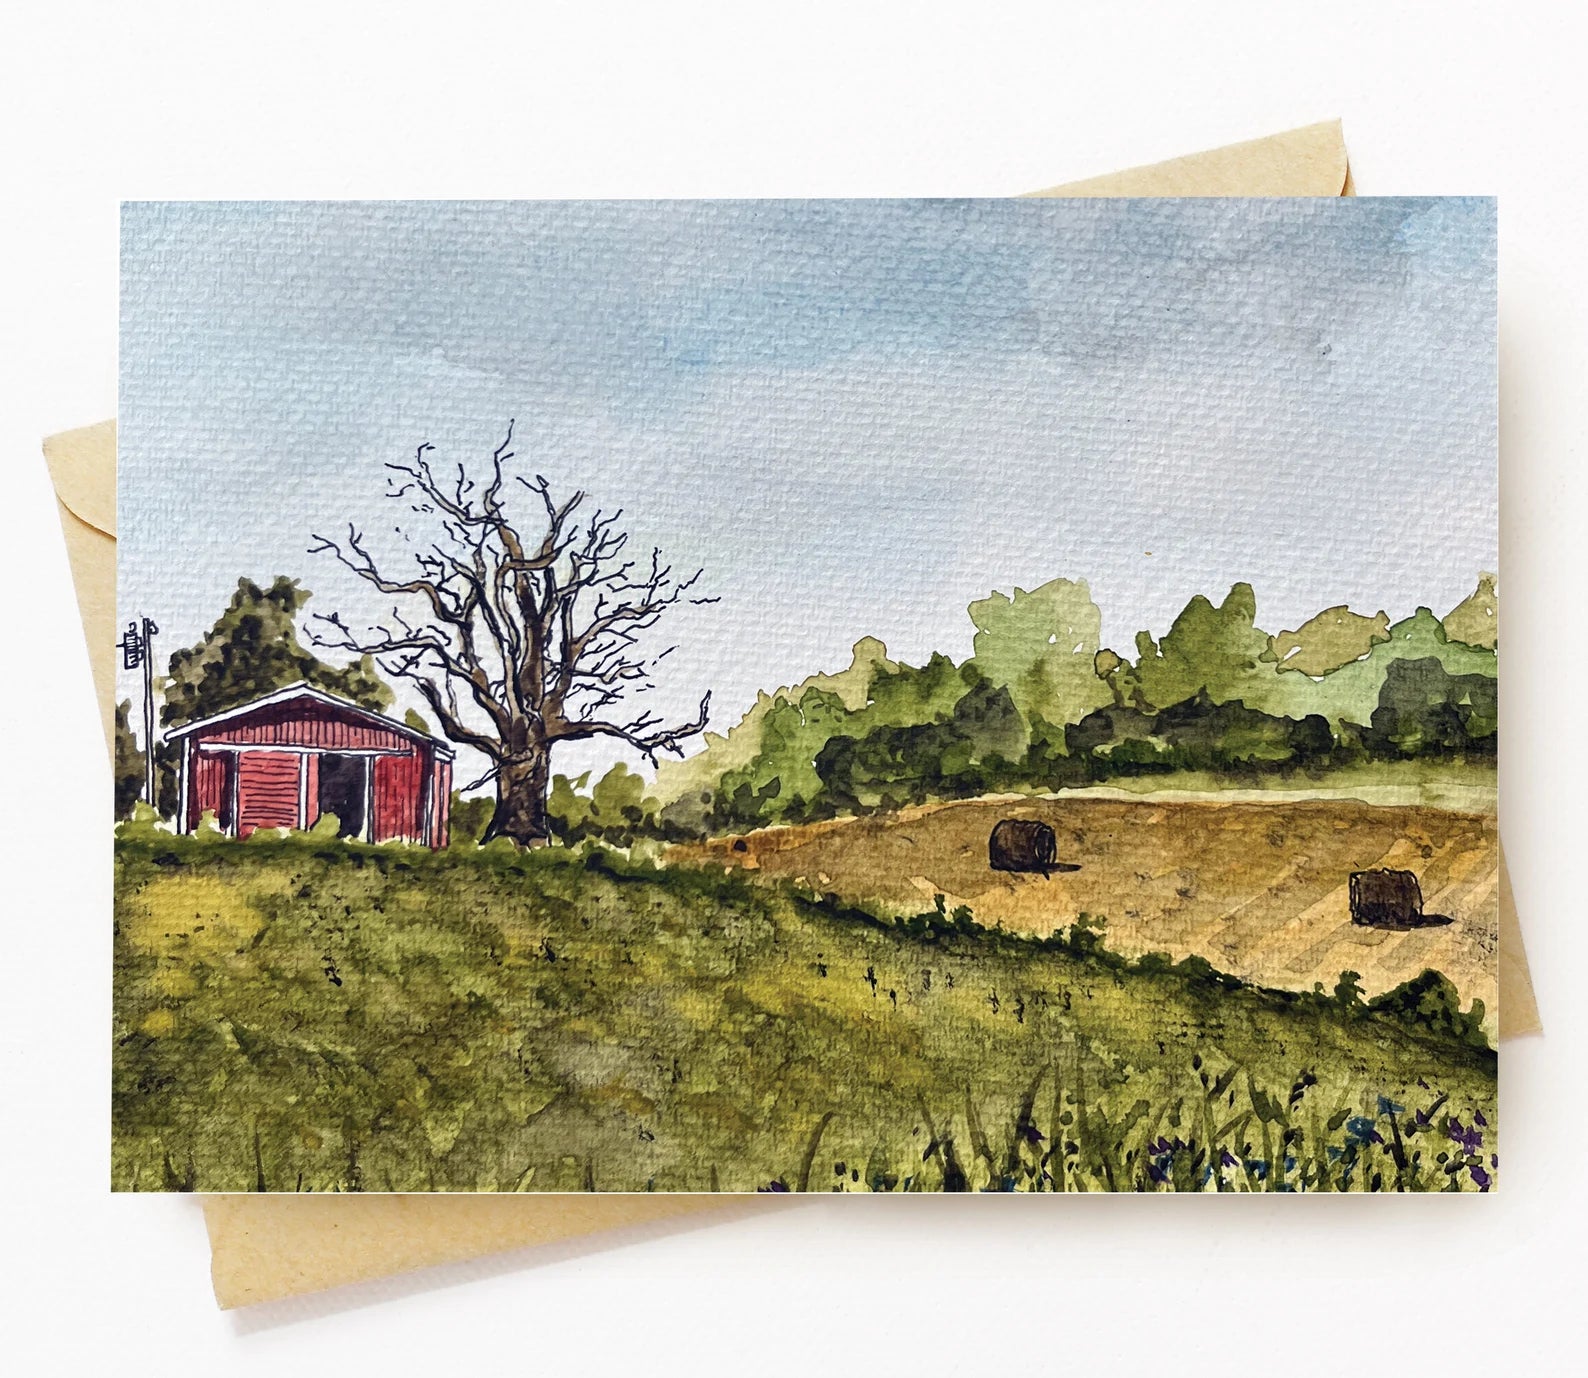 BellavanceInk: Greeting Card With Watercolor Of Farming Field In Crozet Virginia With The Blue Ridge Mountains 5 x 7 Inches - BellavanceInk